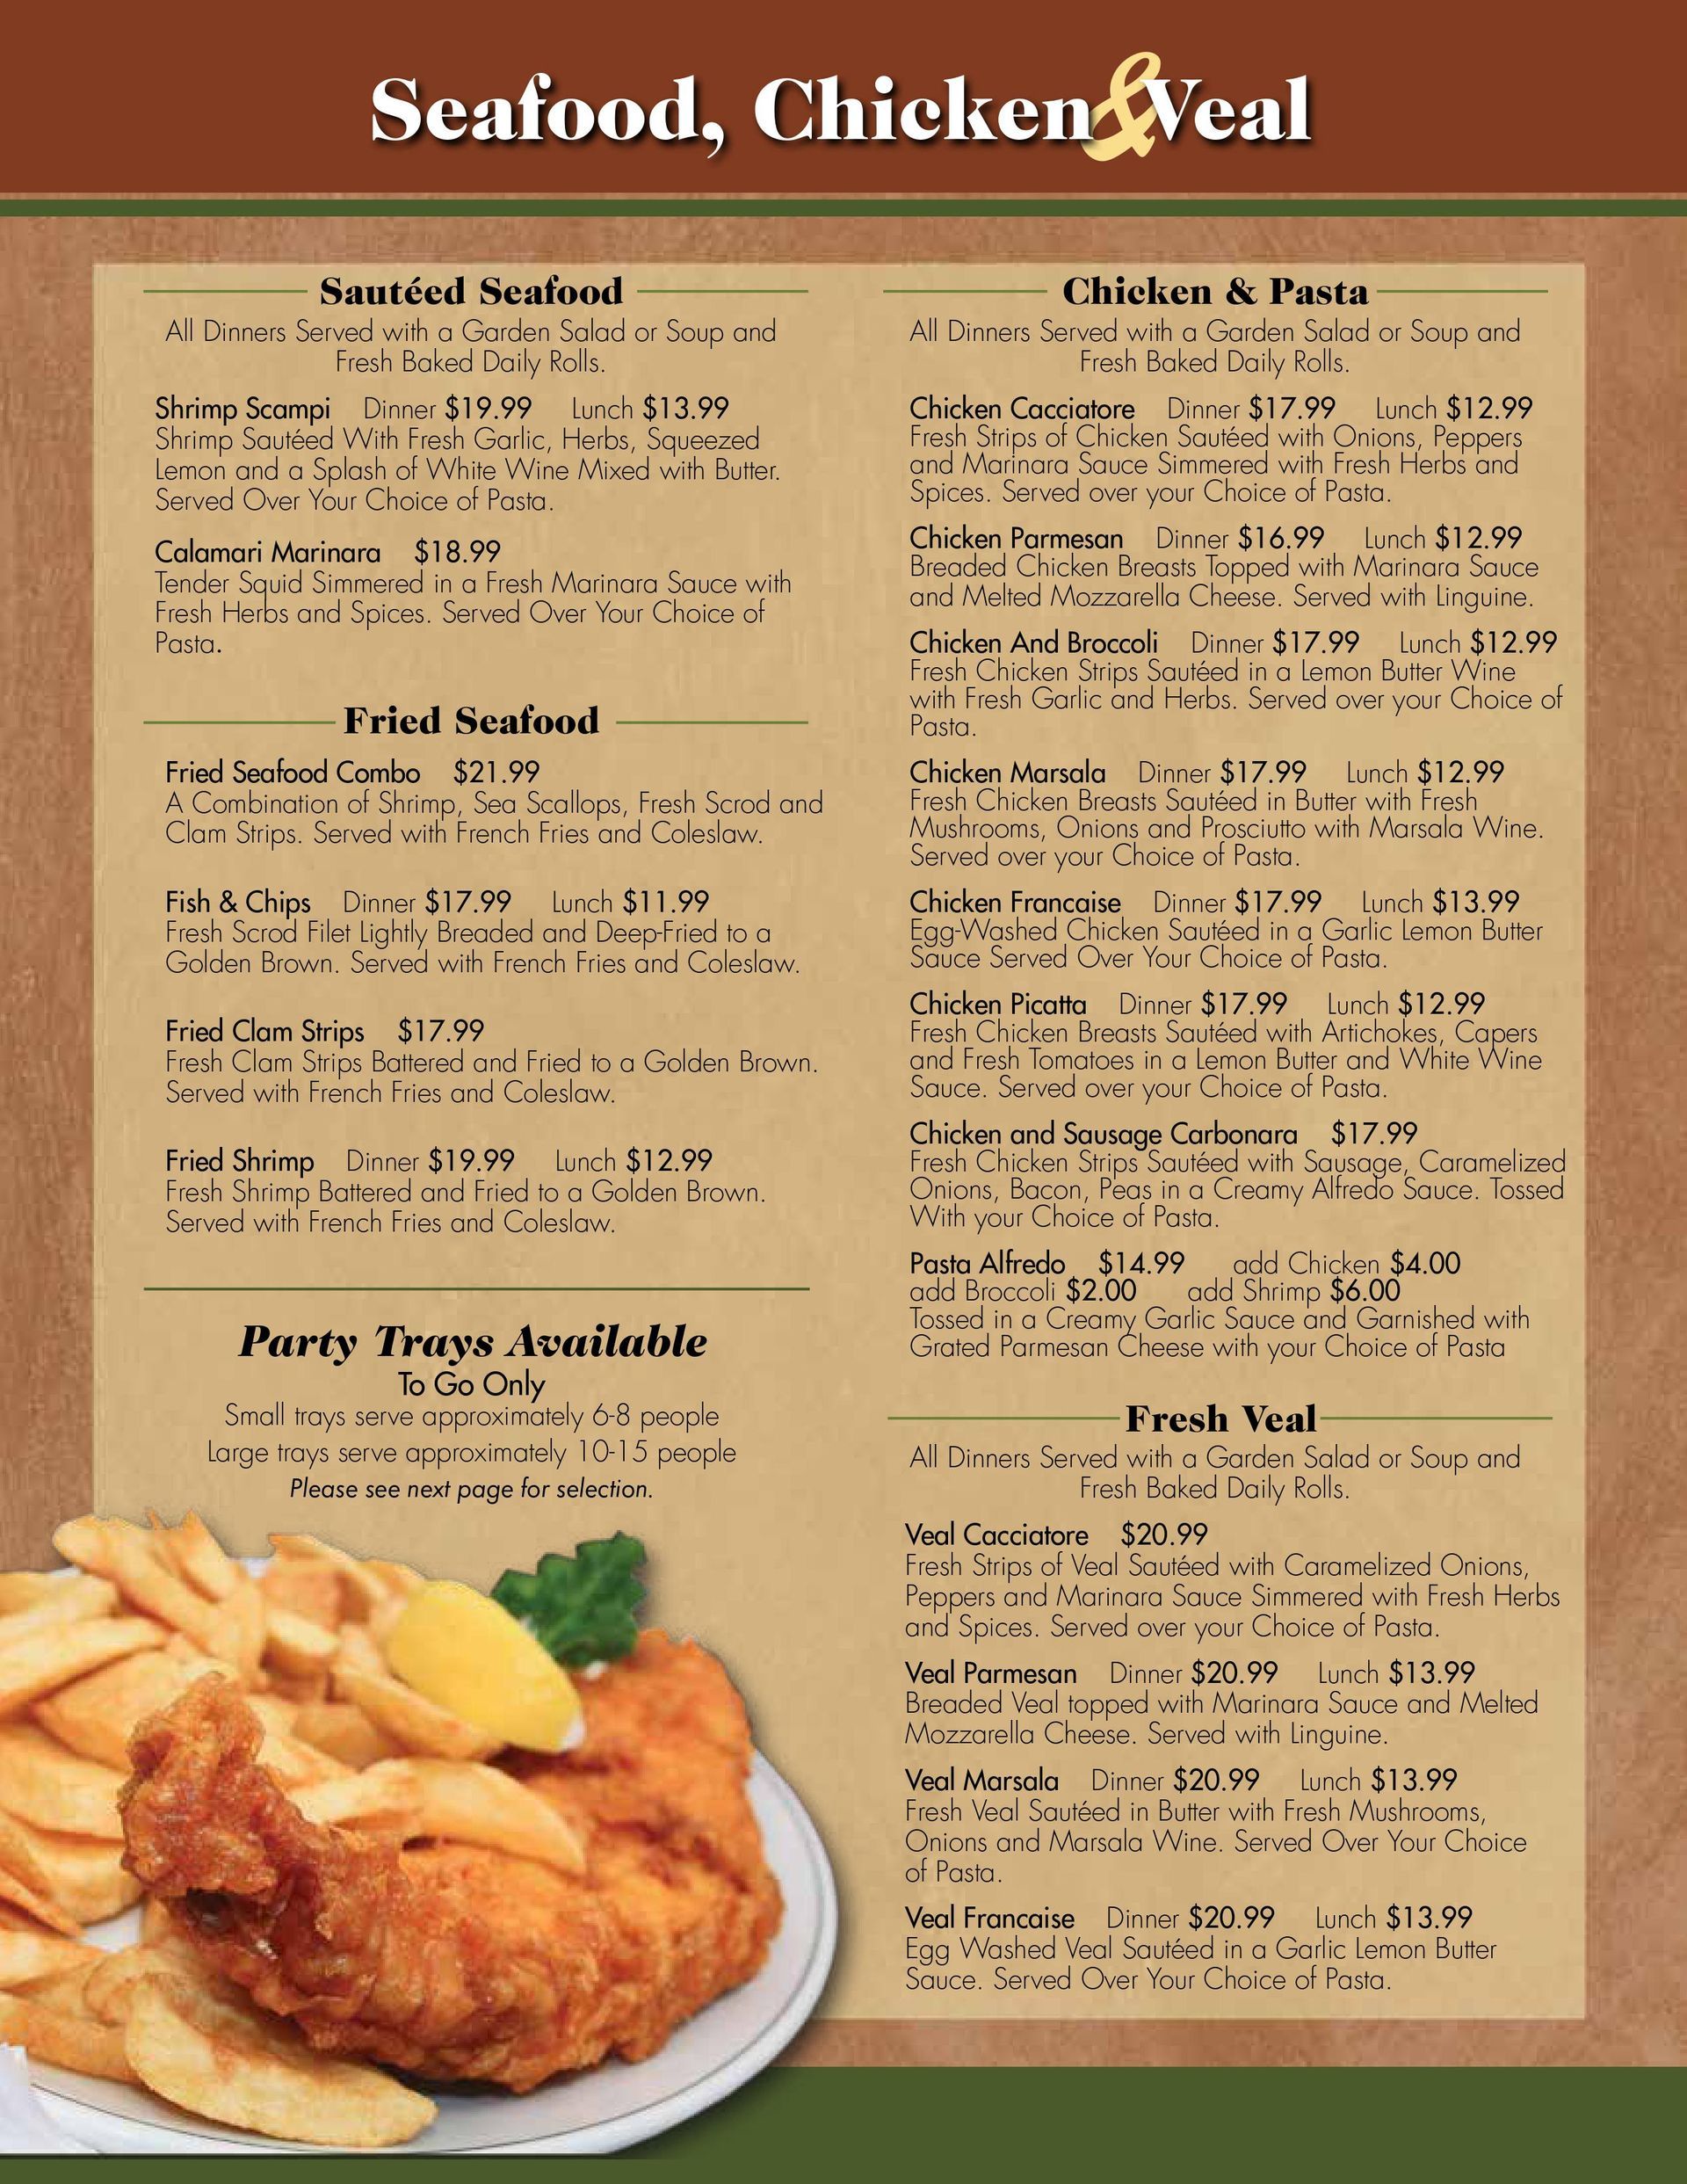 Seafood chicken and veal menu